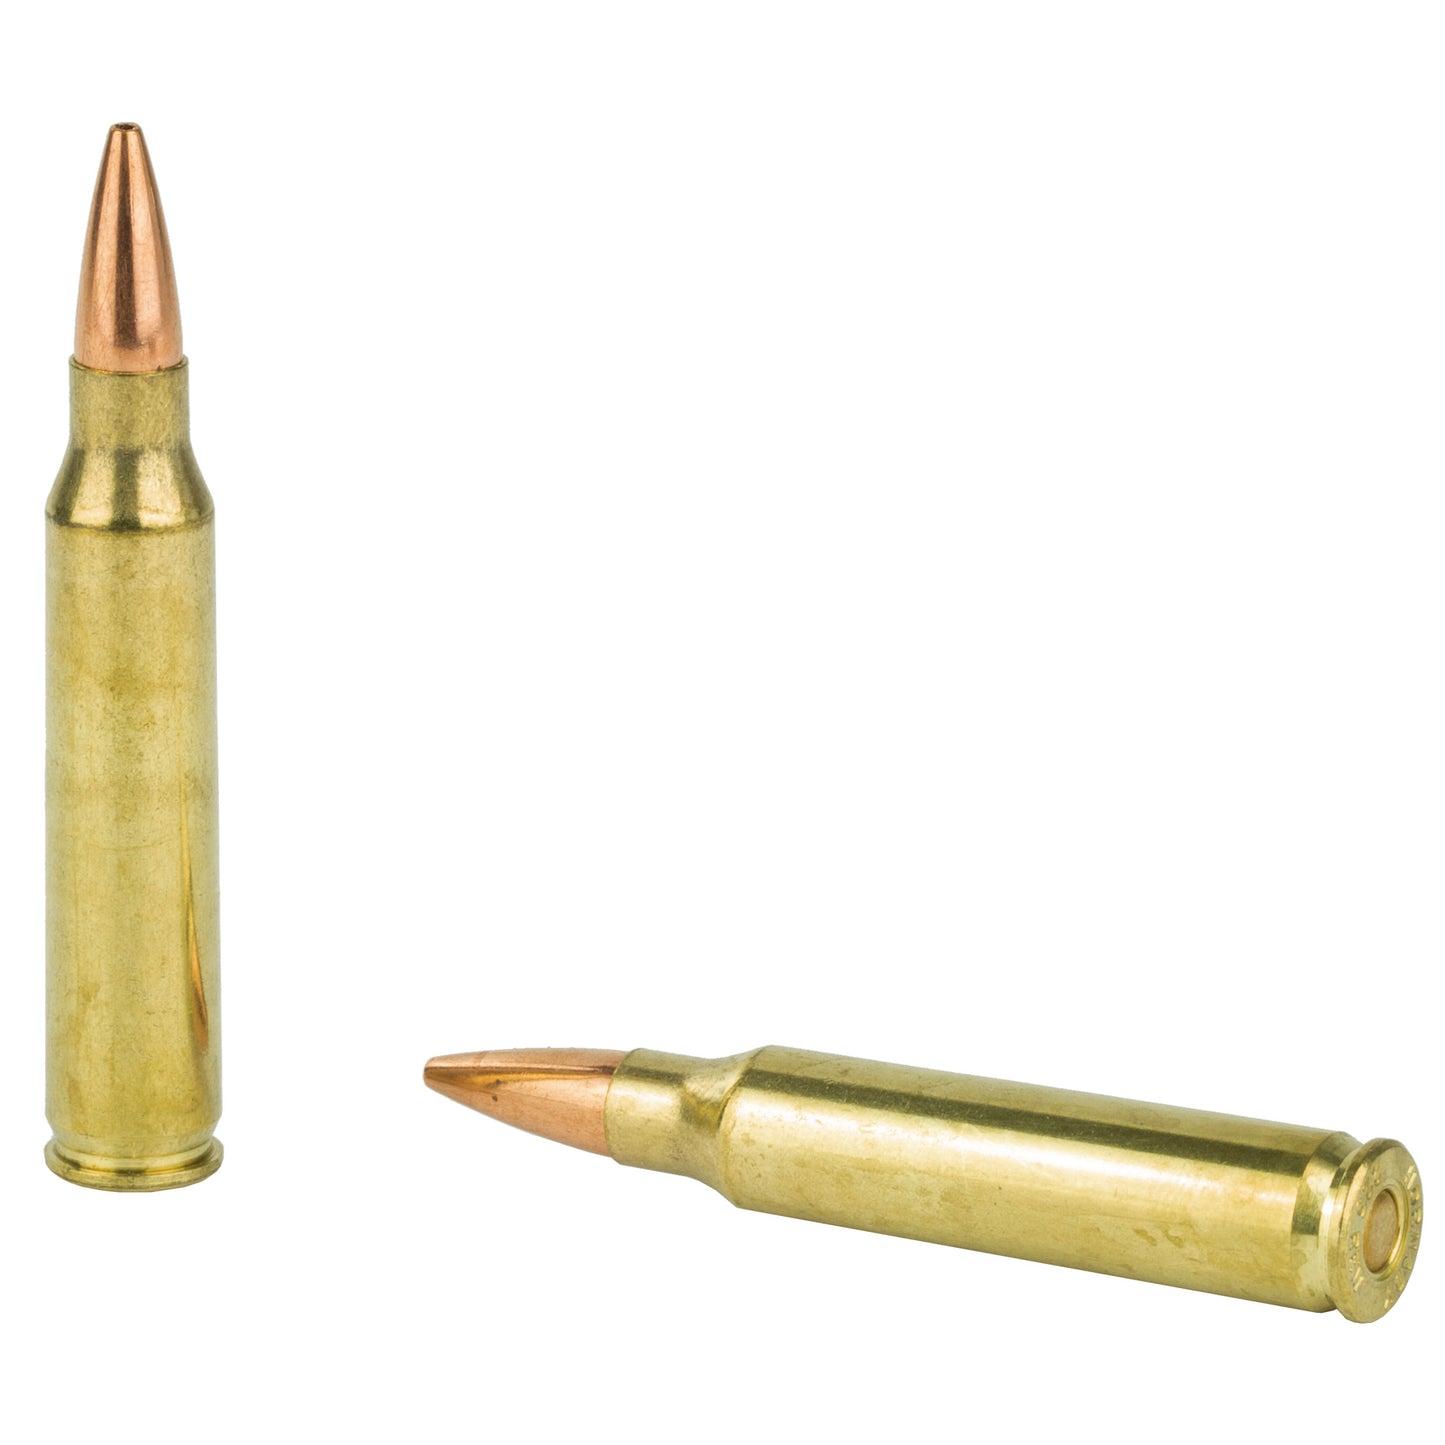 Hornady, Hunting, 223REM, 75 Grain, Boat Tail, Hollow Point, 20 Round Box